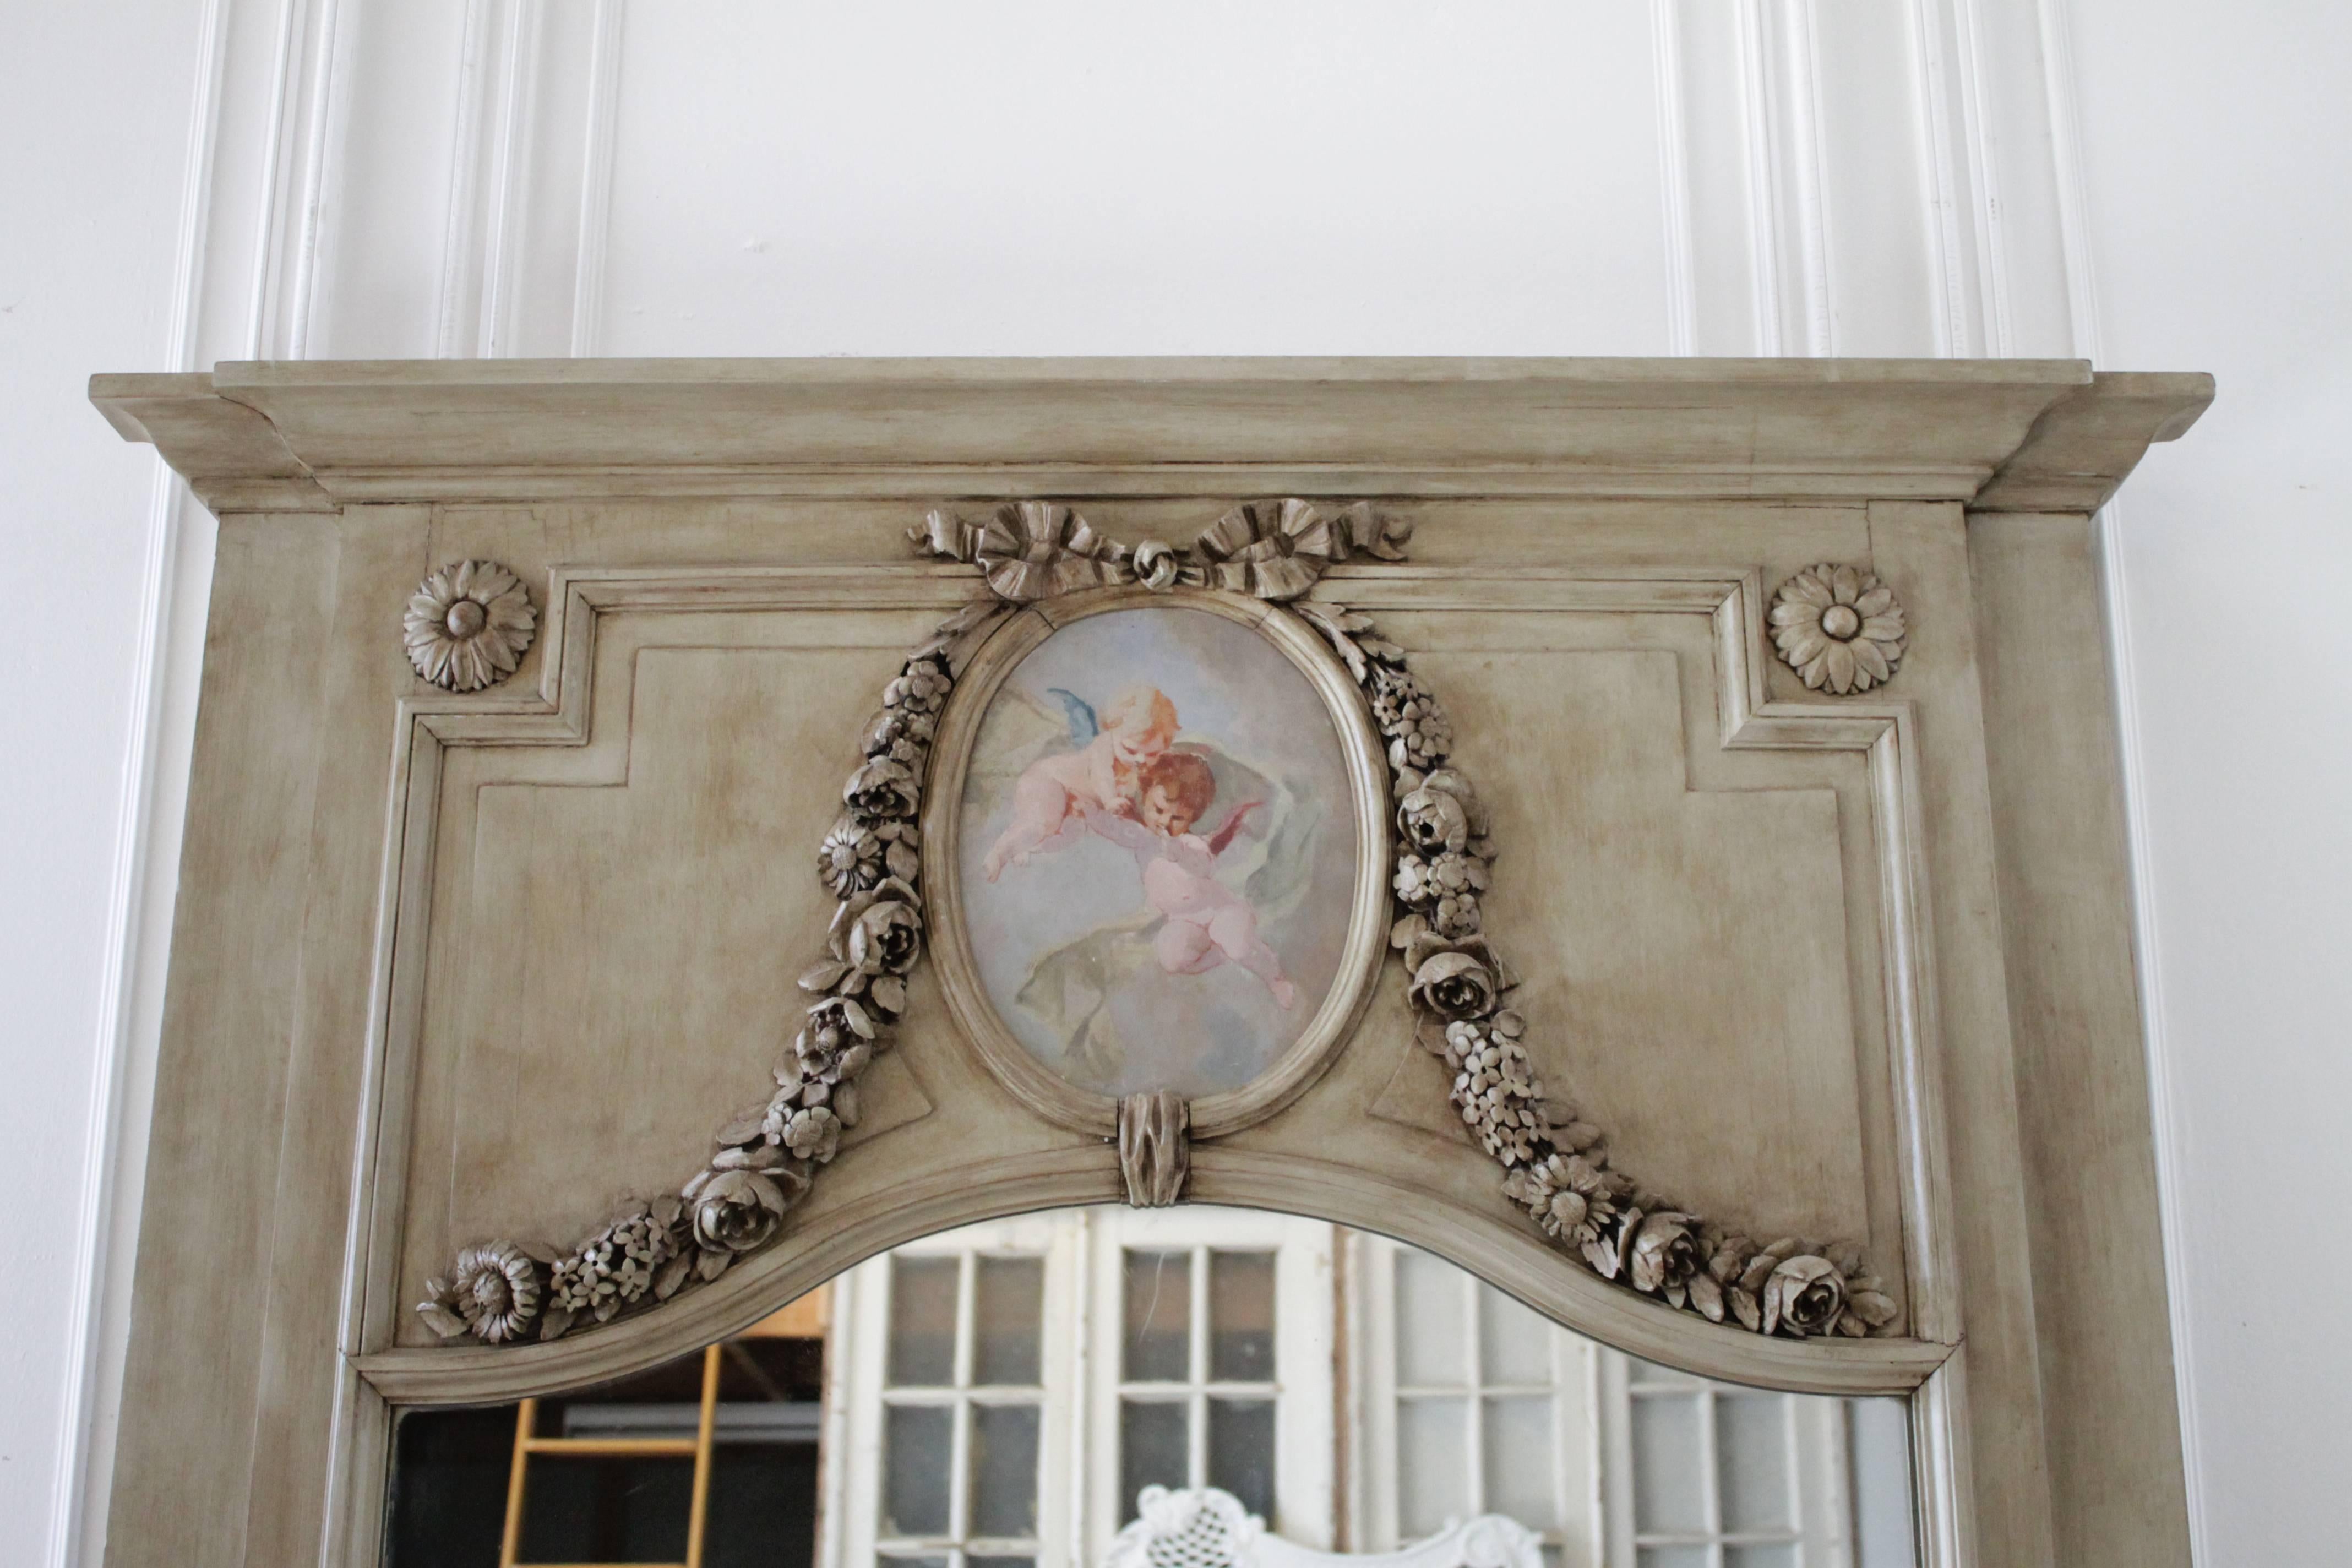 Beautiful large trumeau in the French Style, with hand-painted cherub scene. A large carved ribbon and rose swags add a romantic touch to this simple frame.
Original beveled mirror.
Measures: 51.5